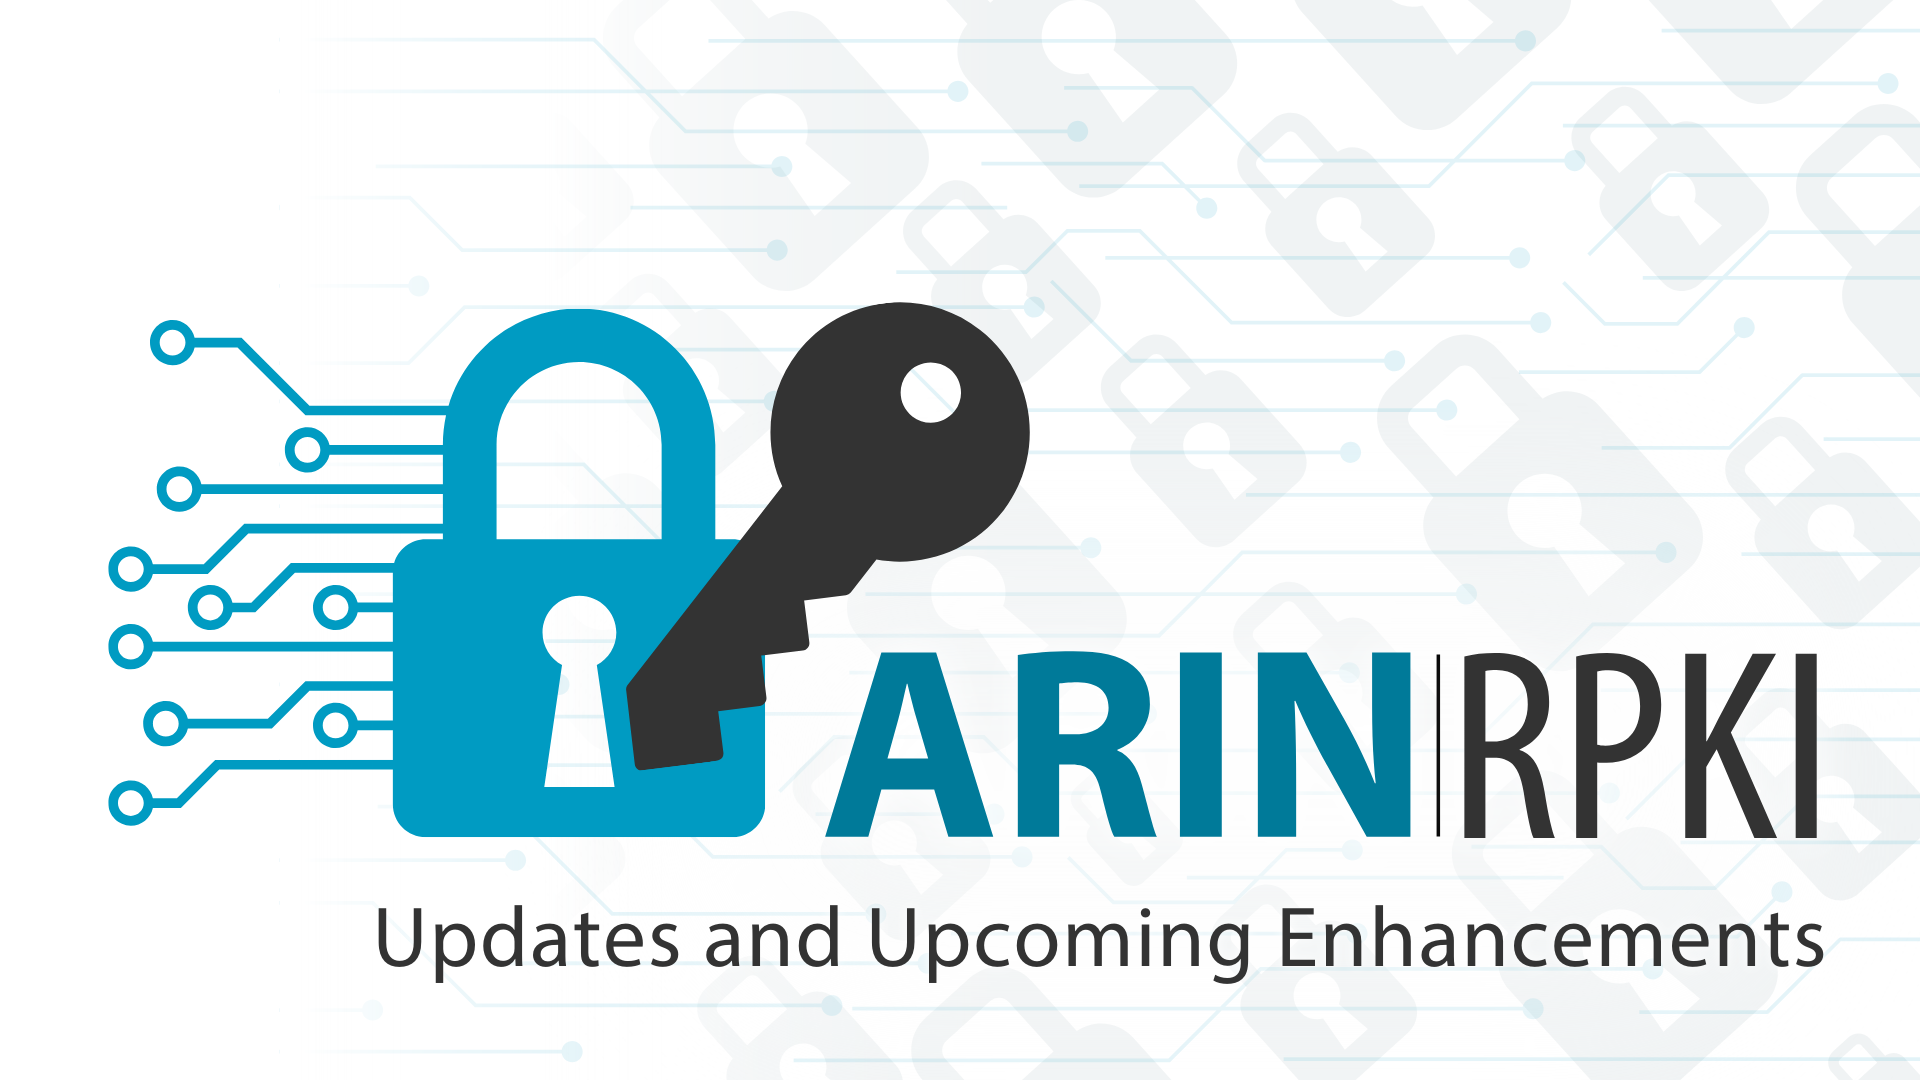 Read the blog ARIN RPKI Updates and Upcoming Enhancements